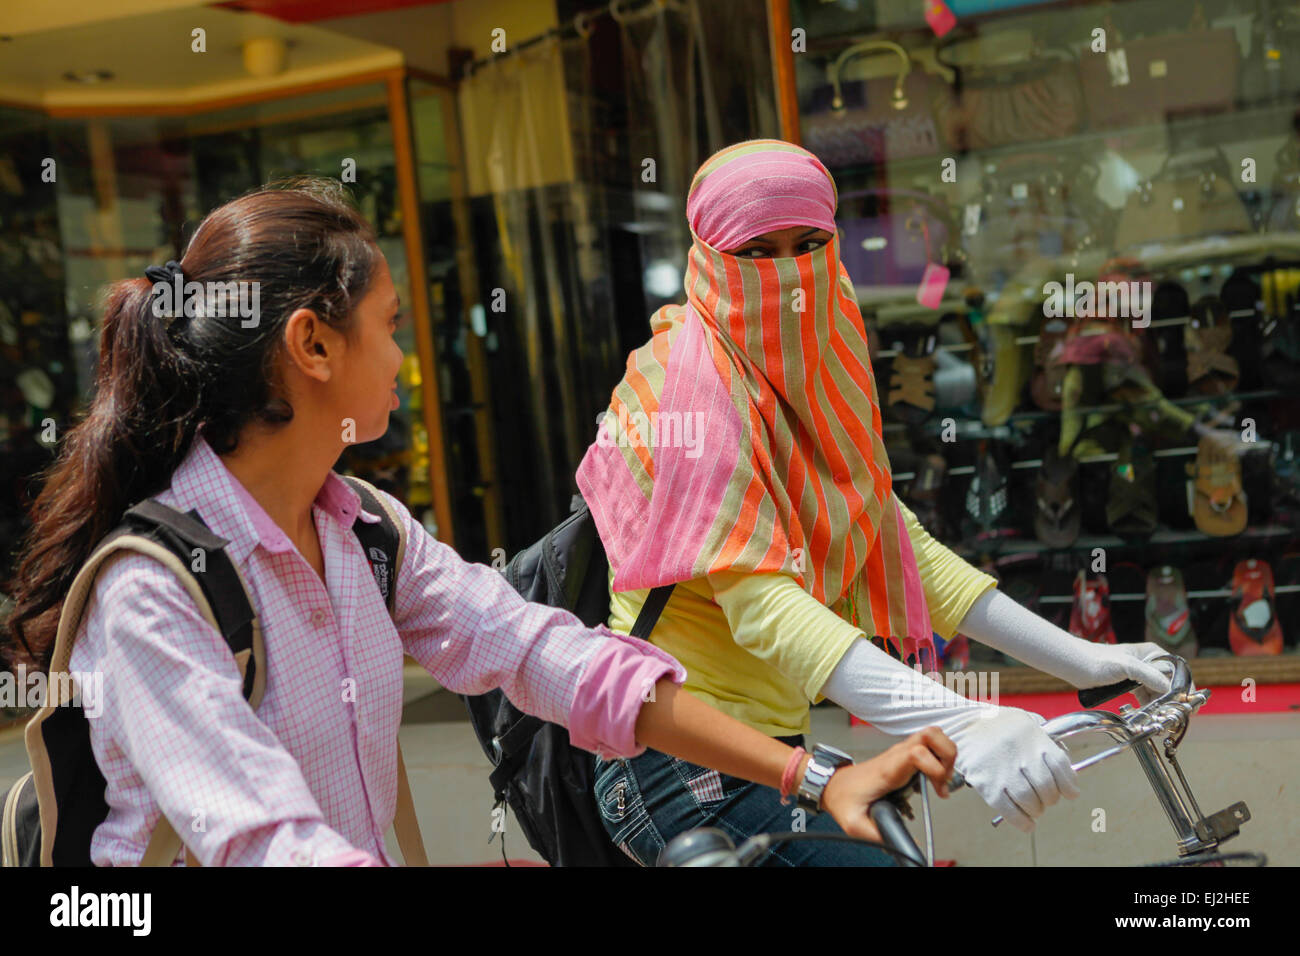 A schoolgirl wearing hijab having a conversation with friend as they are riding bicycles during a traffic jam in Varanasi, Uttar Pradesh, India. Stock Photo